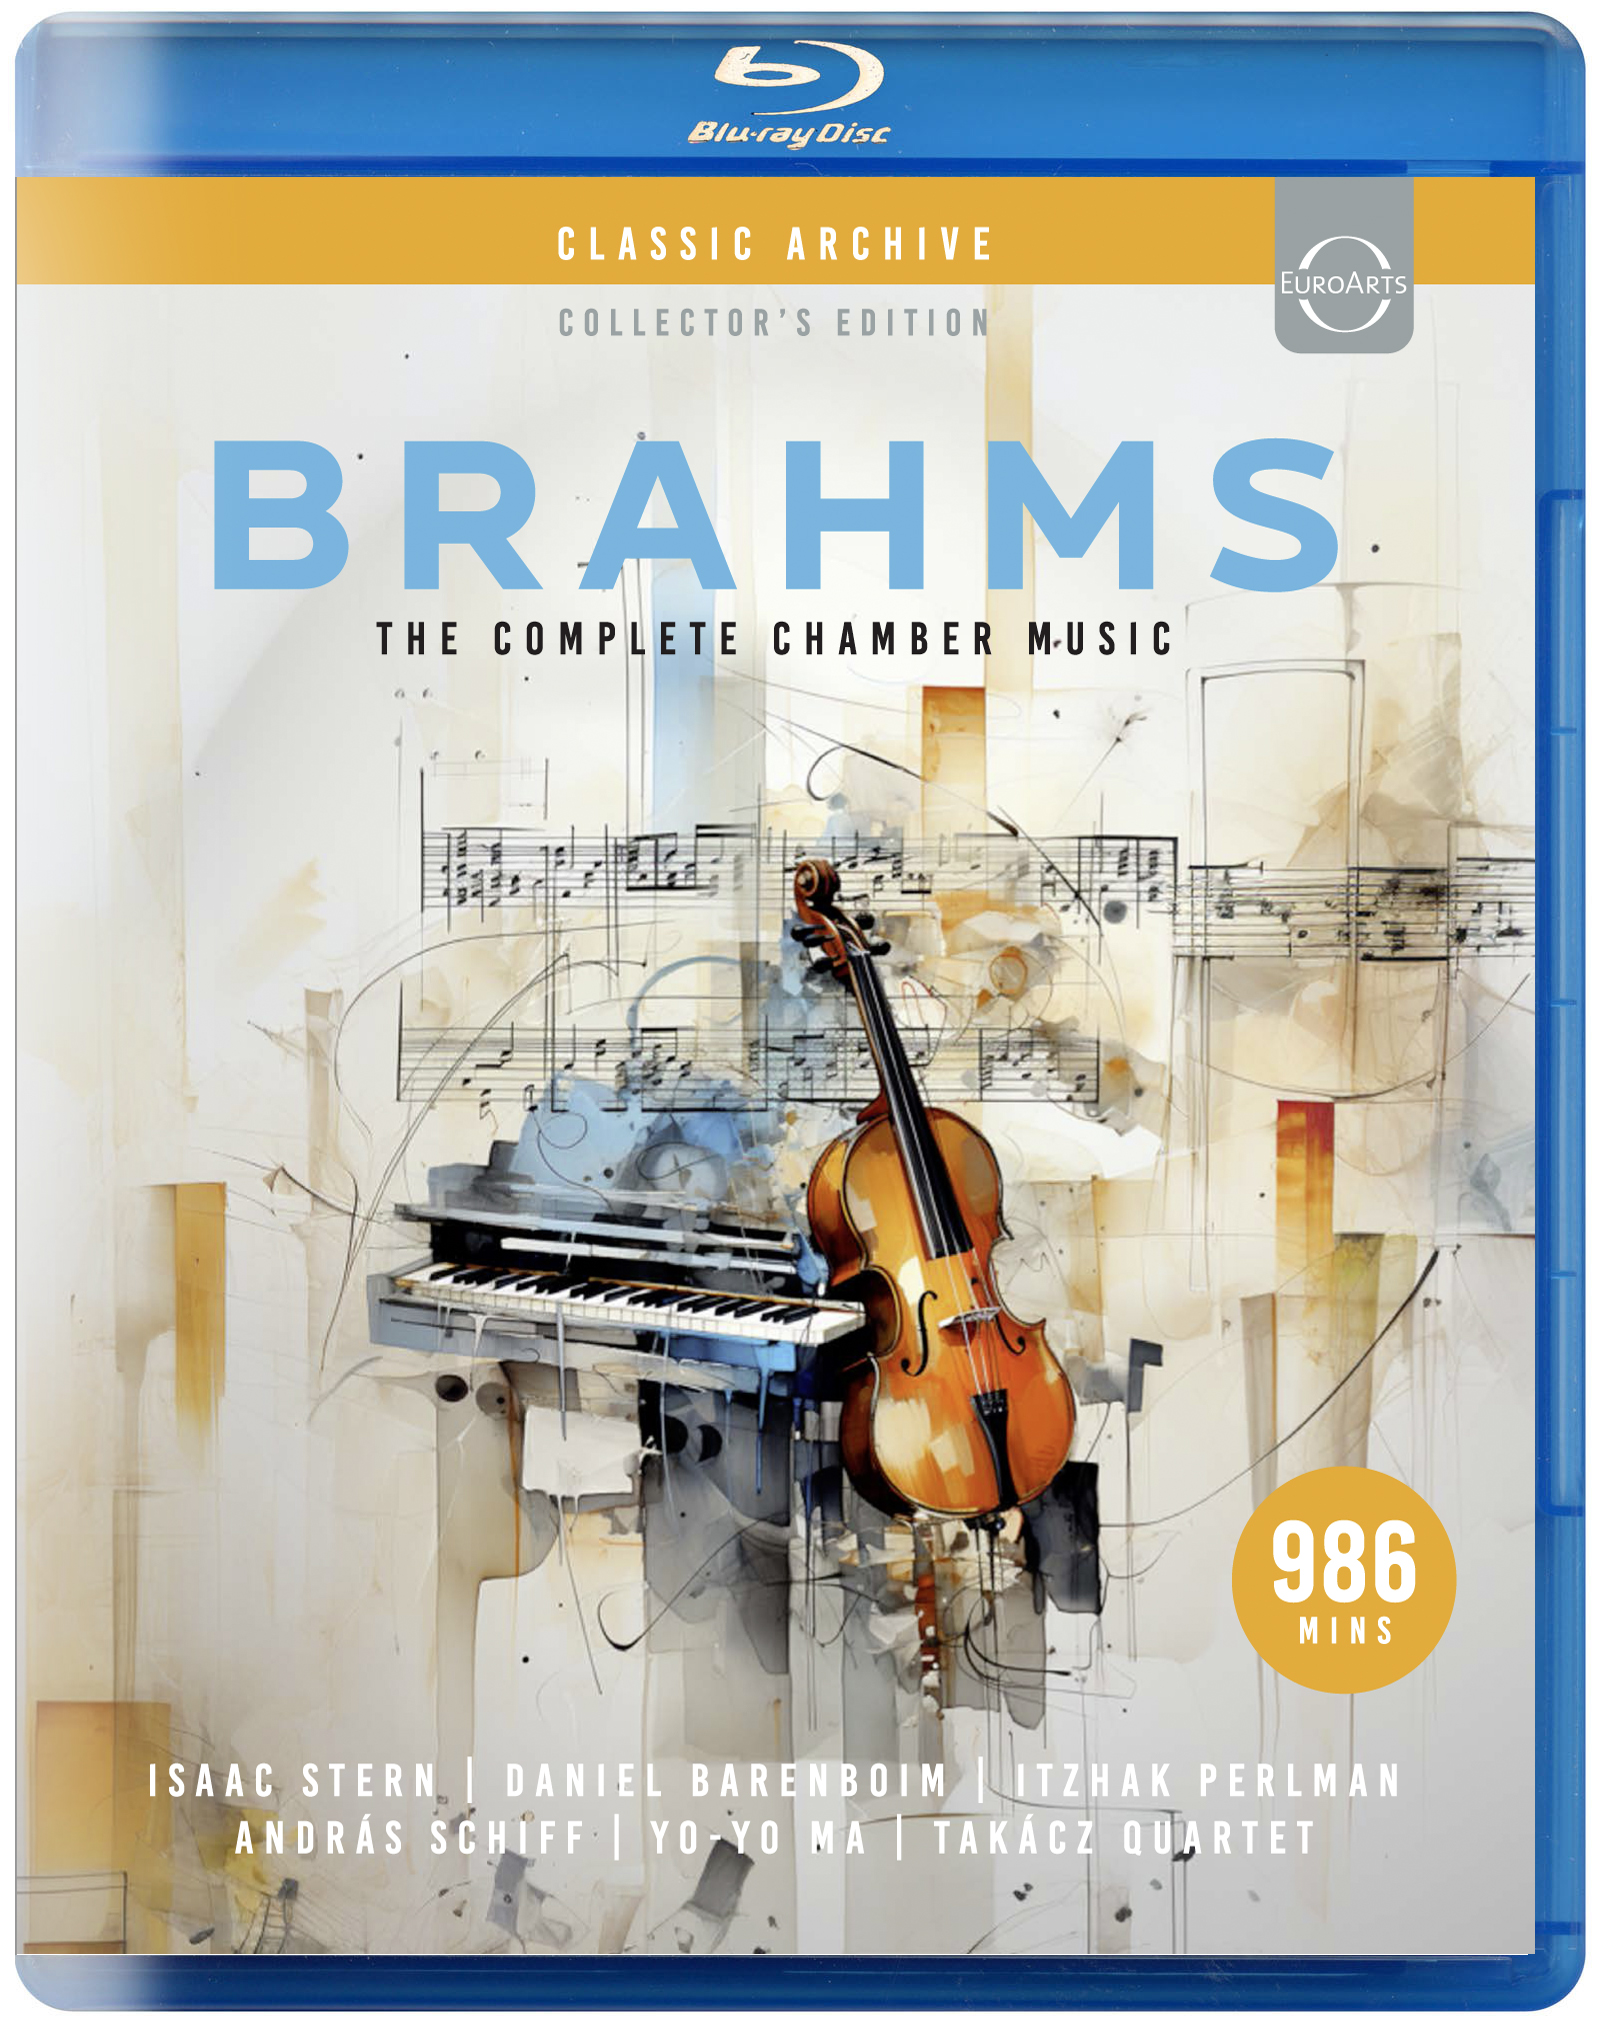 Brahms – The Complete Chamber Music | Warner Classics